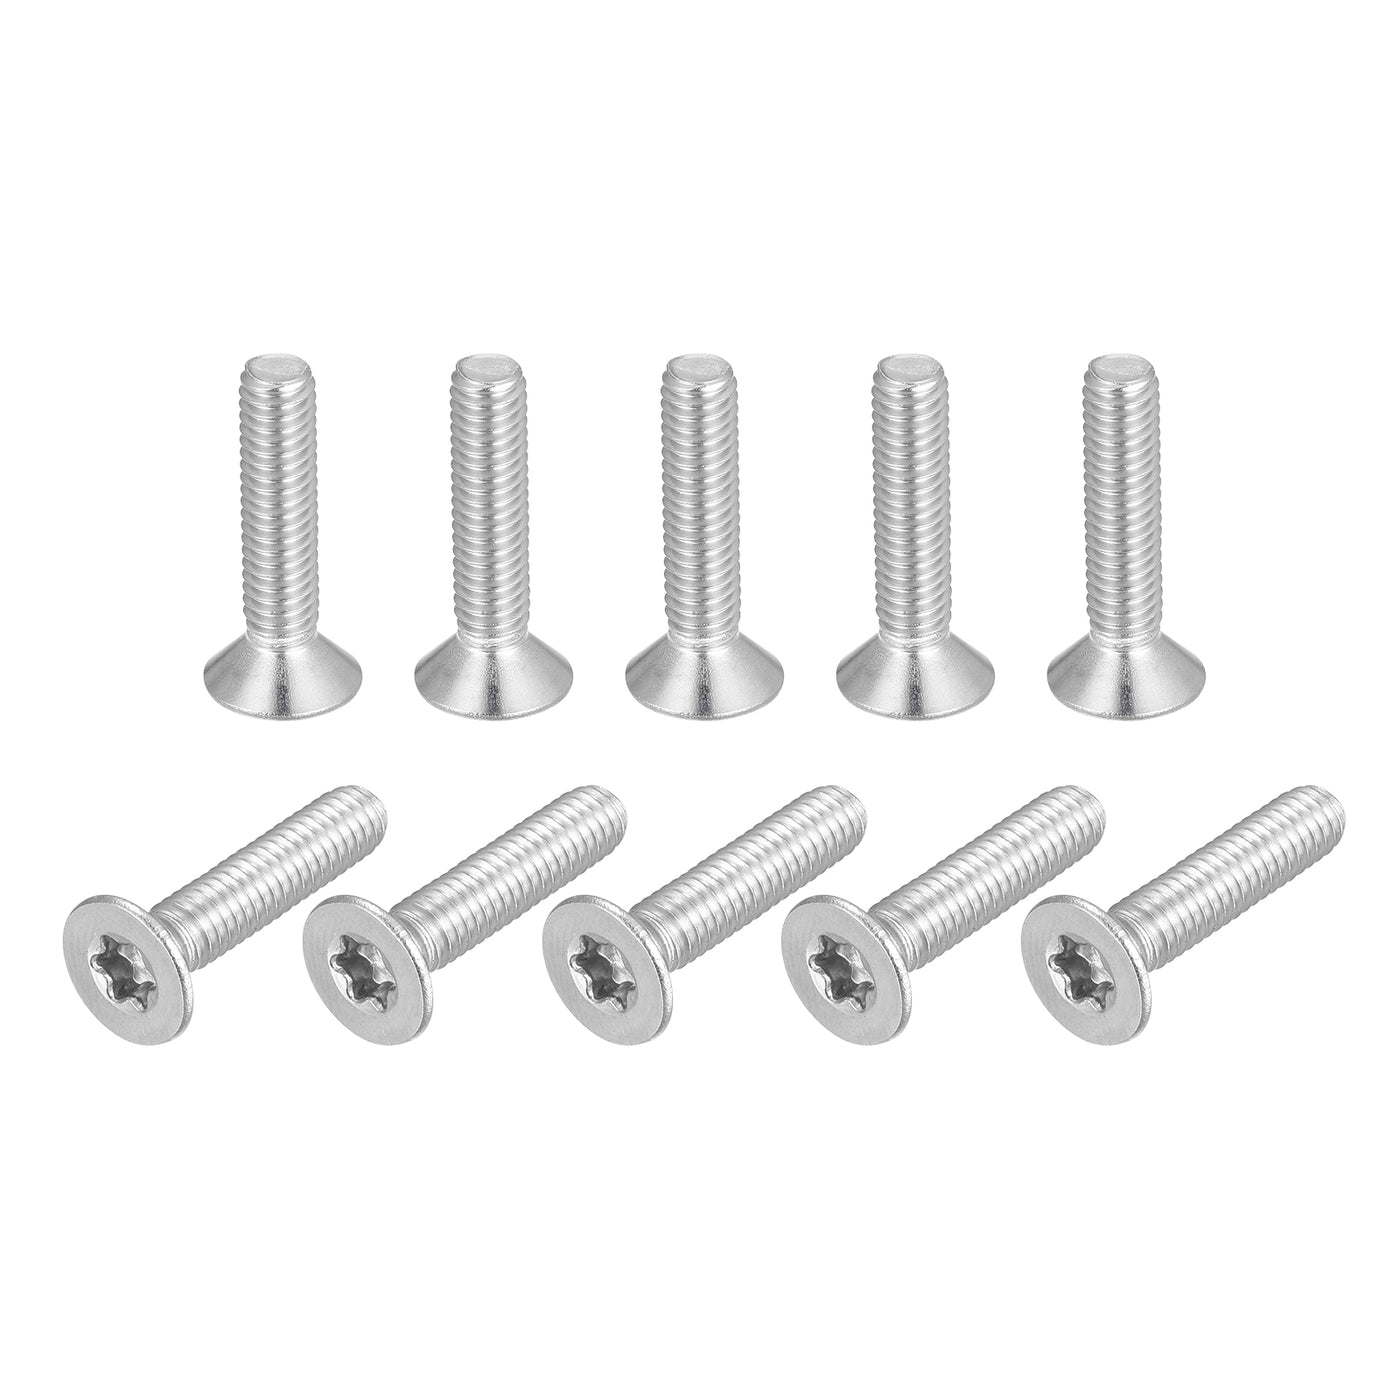 uxcell Uxcell M4x18mm Torx Security Screws, 10pcs 316 Stainless Steel Countersunk Head Screw